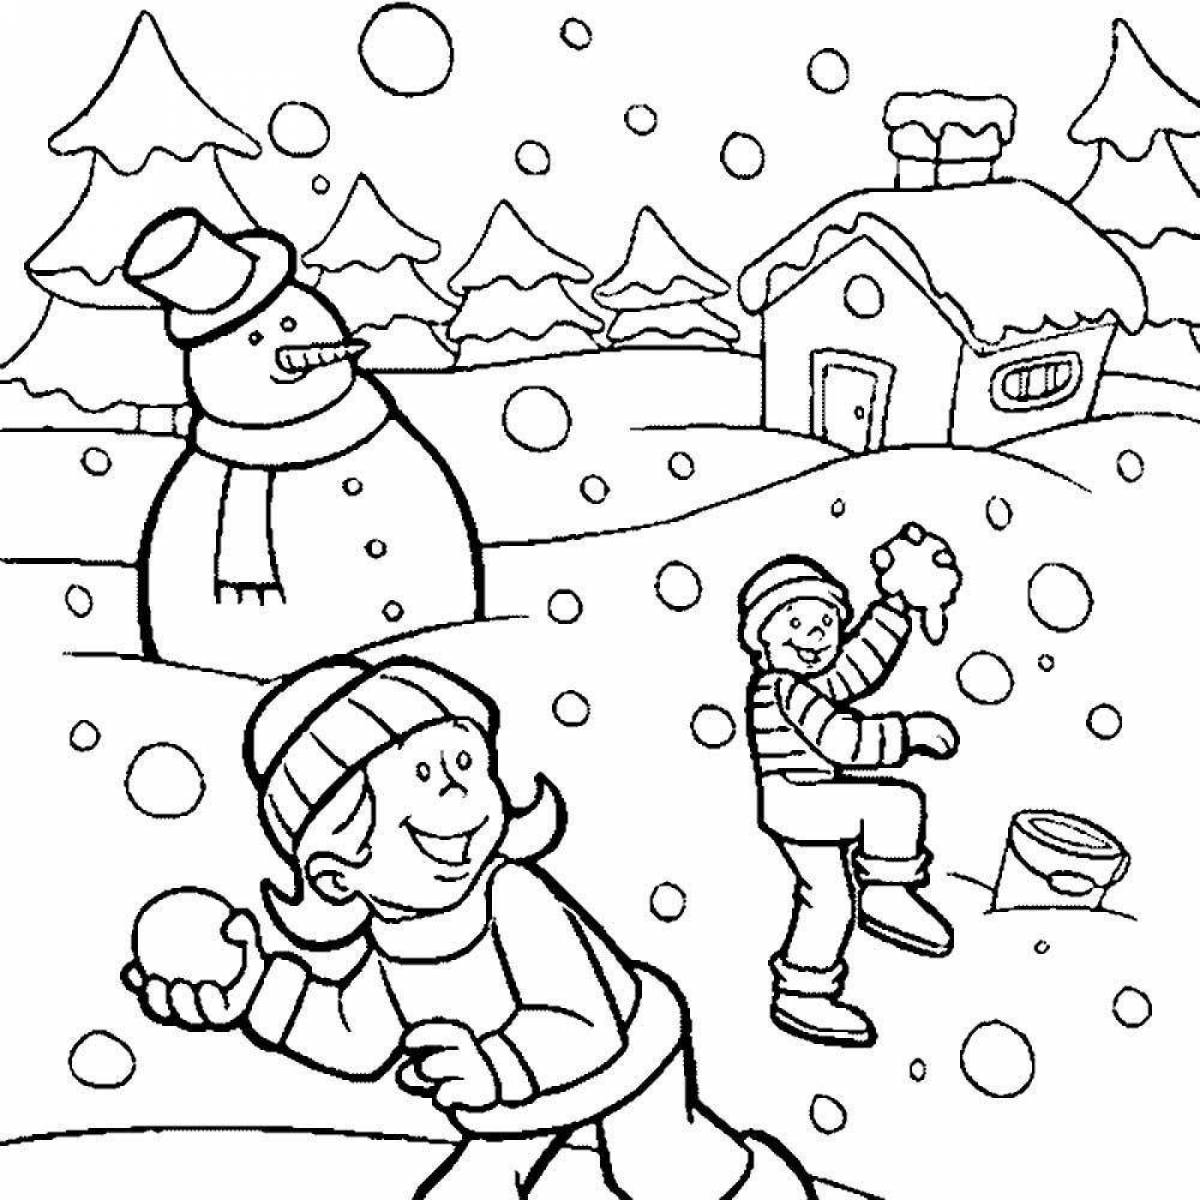 Drawing of an arctic cold winter